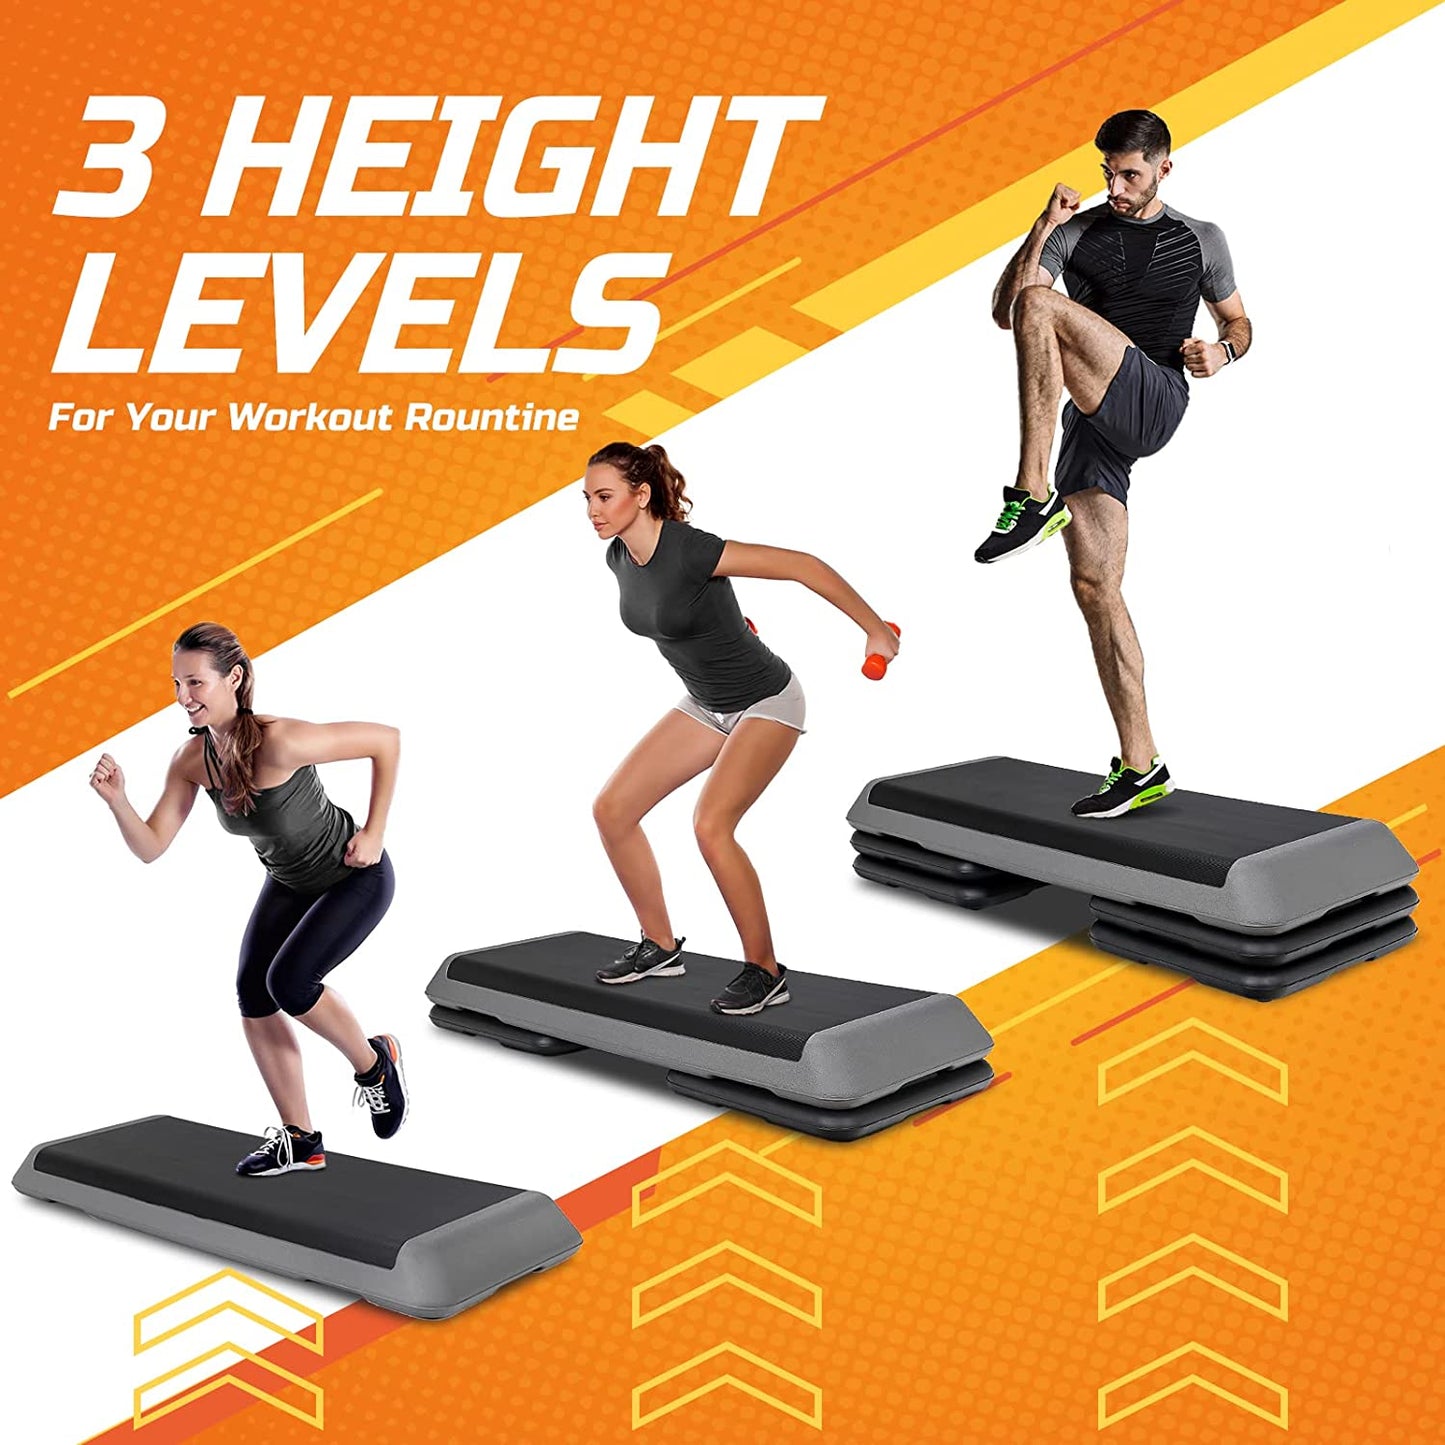 43'' Exercise Aerobic Step Platform Adjustable Fitness Stepper with 4 Detachable Risers Fitness Workout Stepper for Home Gym Cardio Strength & Training